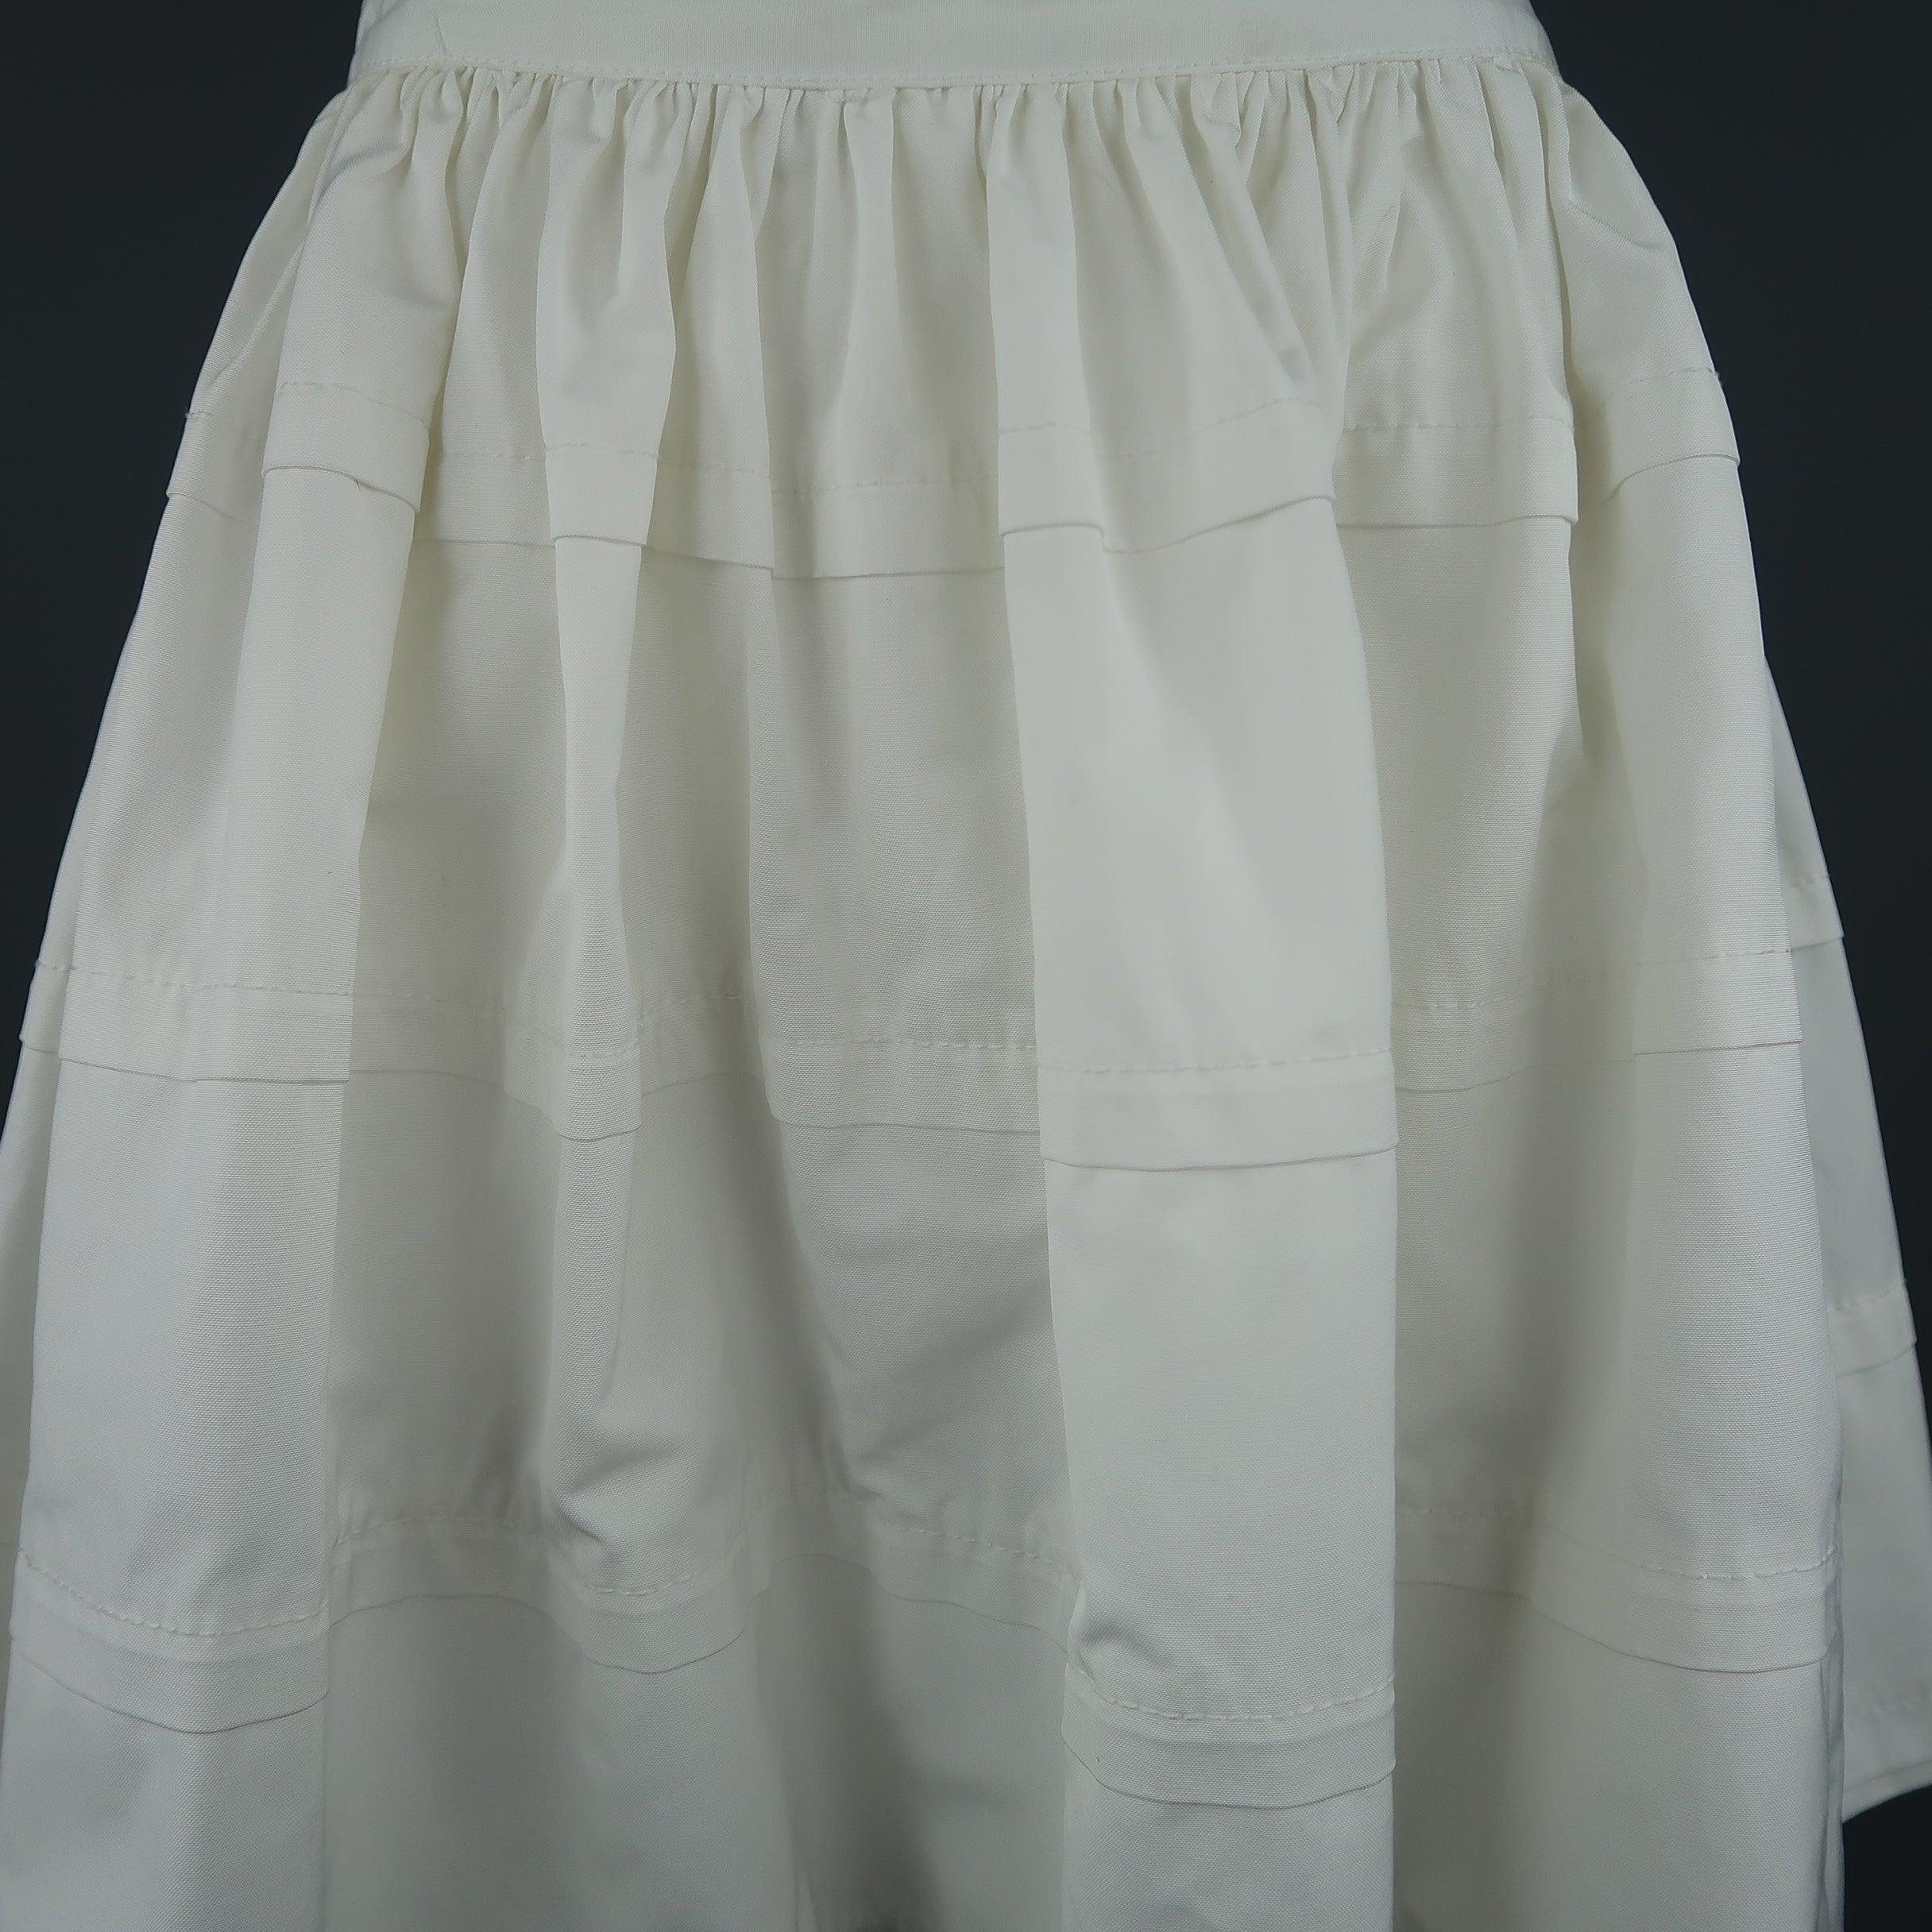 This RED VALENTINO mini petticoat skirt comes in a cotton blend canvas fabric and features a skinny waistband, gathered top and tiered layers. Made in Italy.
Excellent Pre-Owned Condition.
 

Marked:   6
 

Measurements: 
  
l	Waist: 31 inches